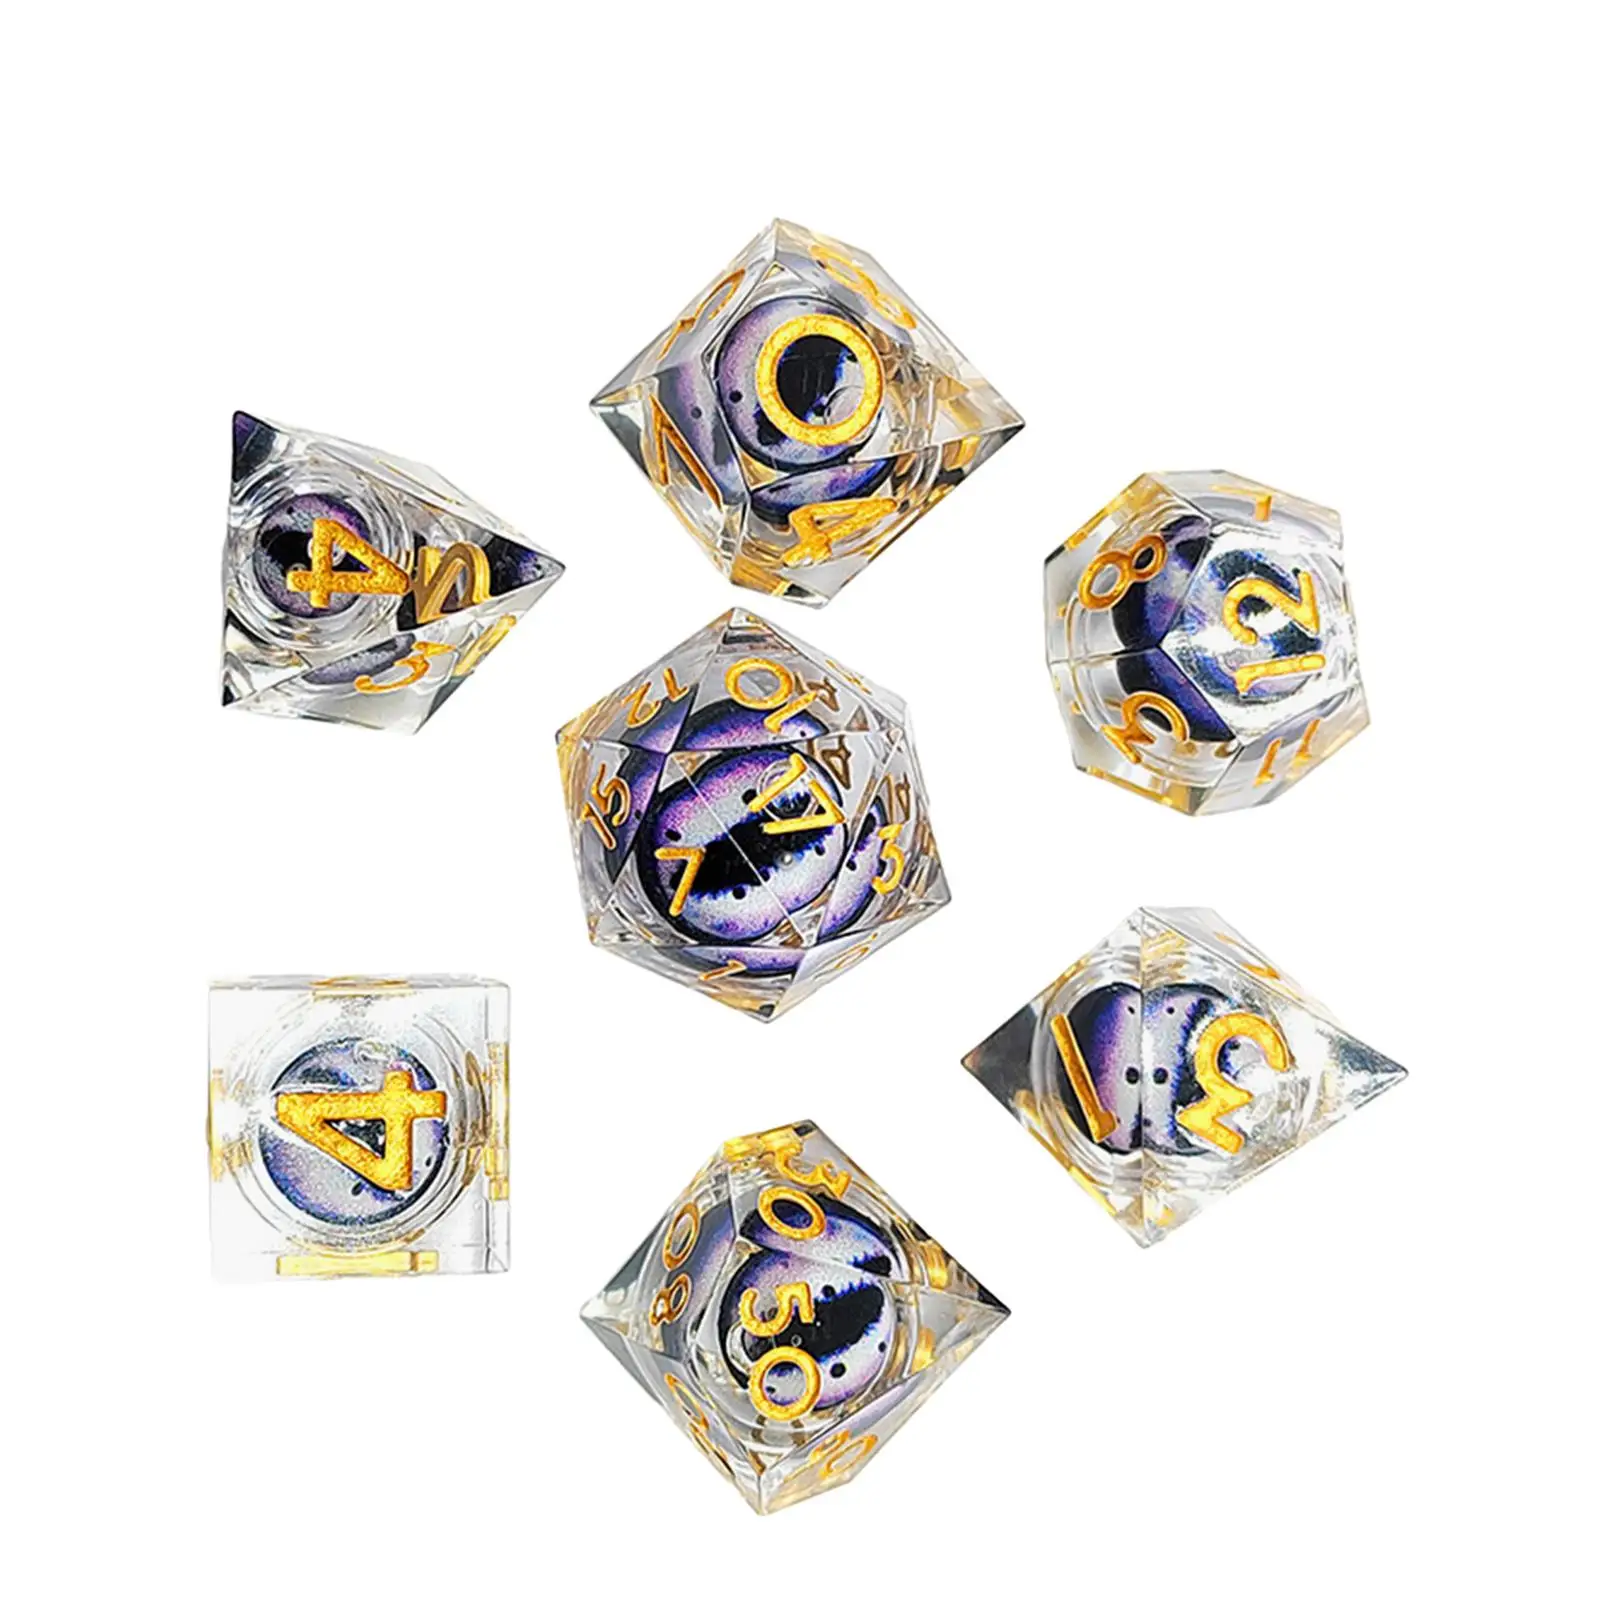 Resin Polyhedral Eye Dice 7Pcs Set Accessories for Teaching Projects